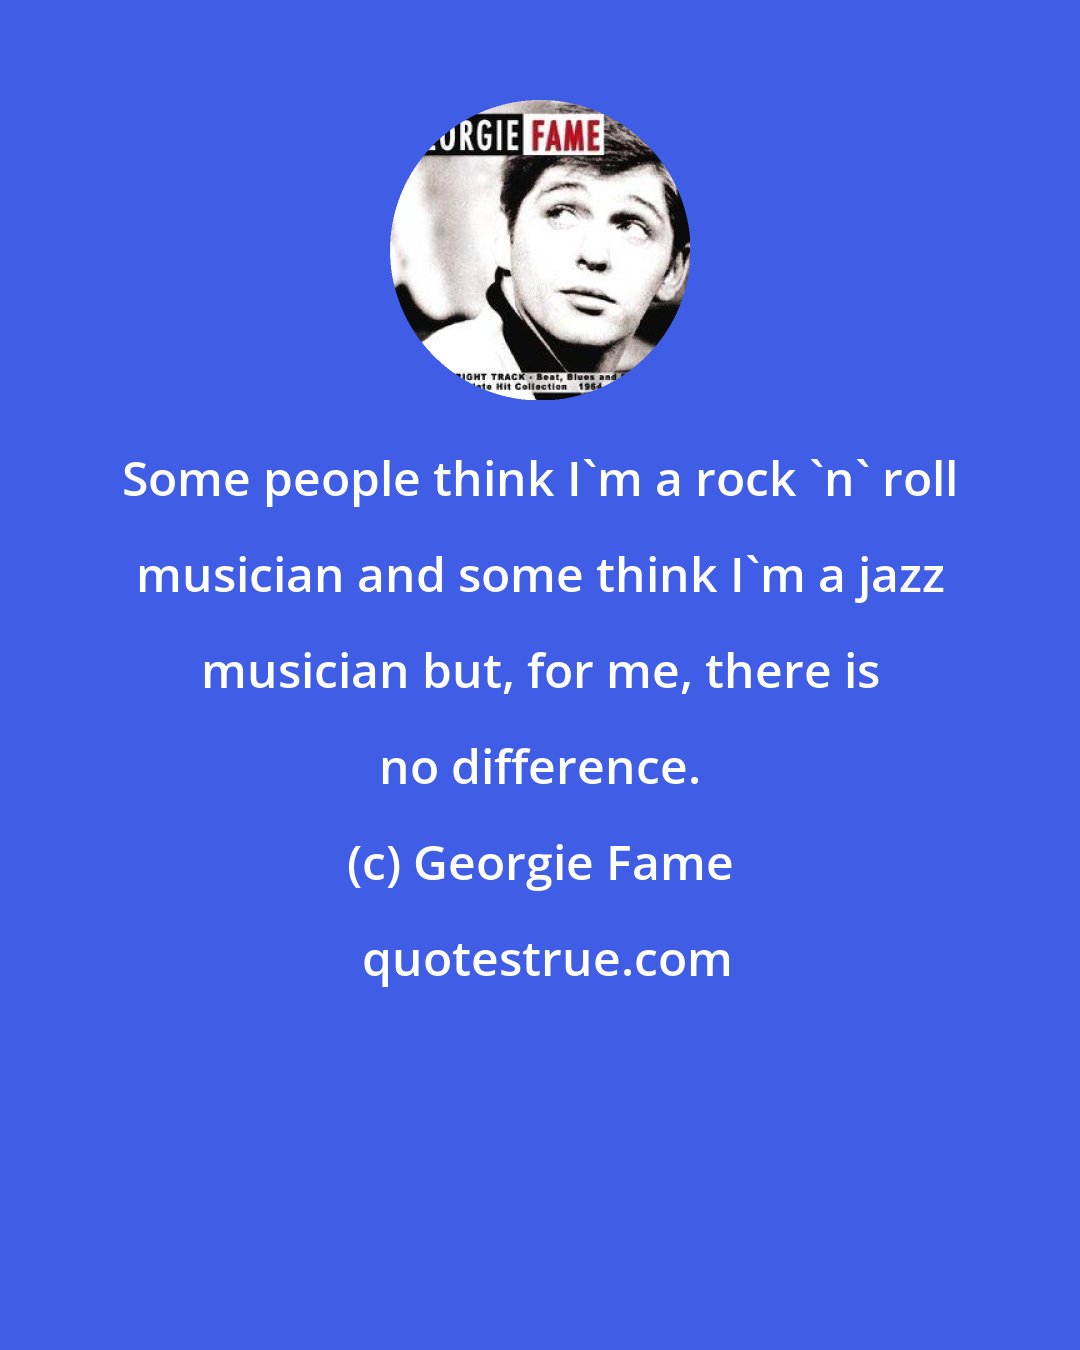 Georgie Fame: Some people think I'm a rock 'n' roll musician and some think I'm a jazz musician but, for me, there is no difference.